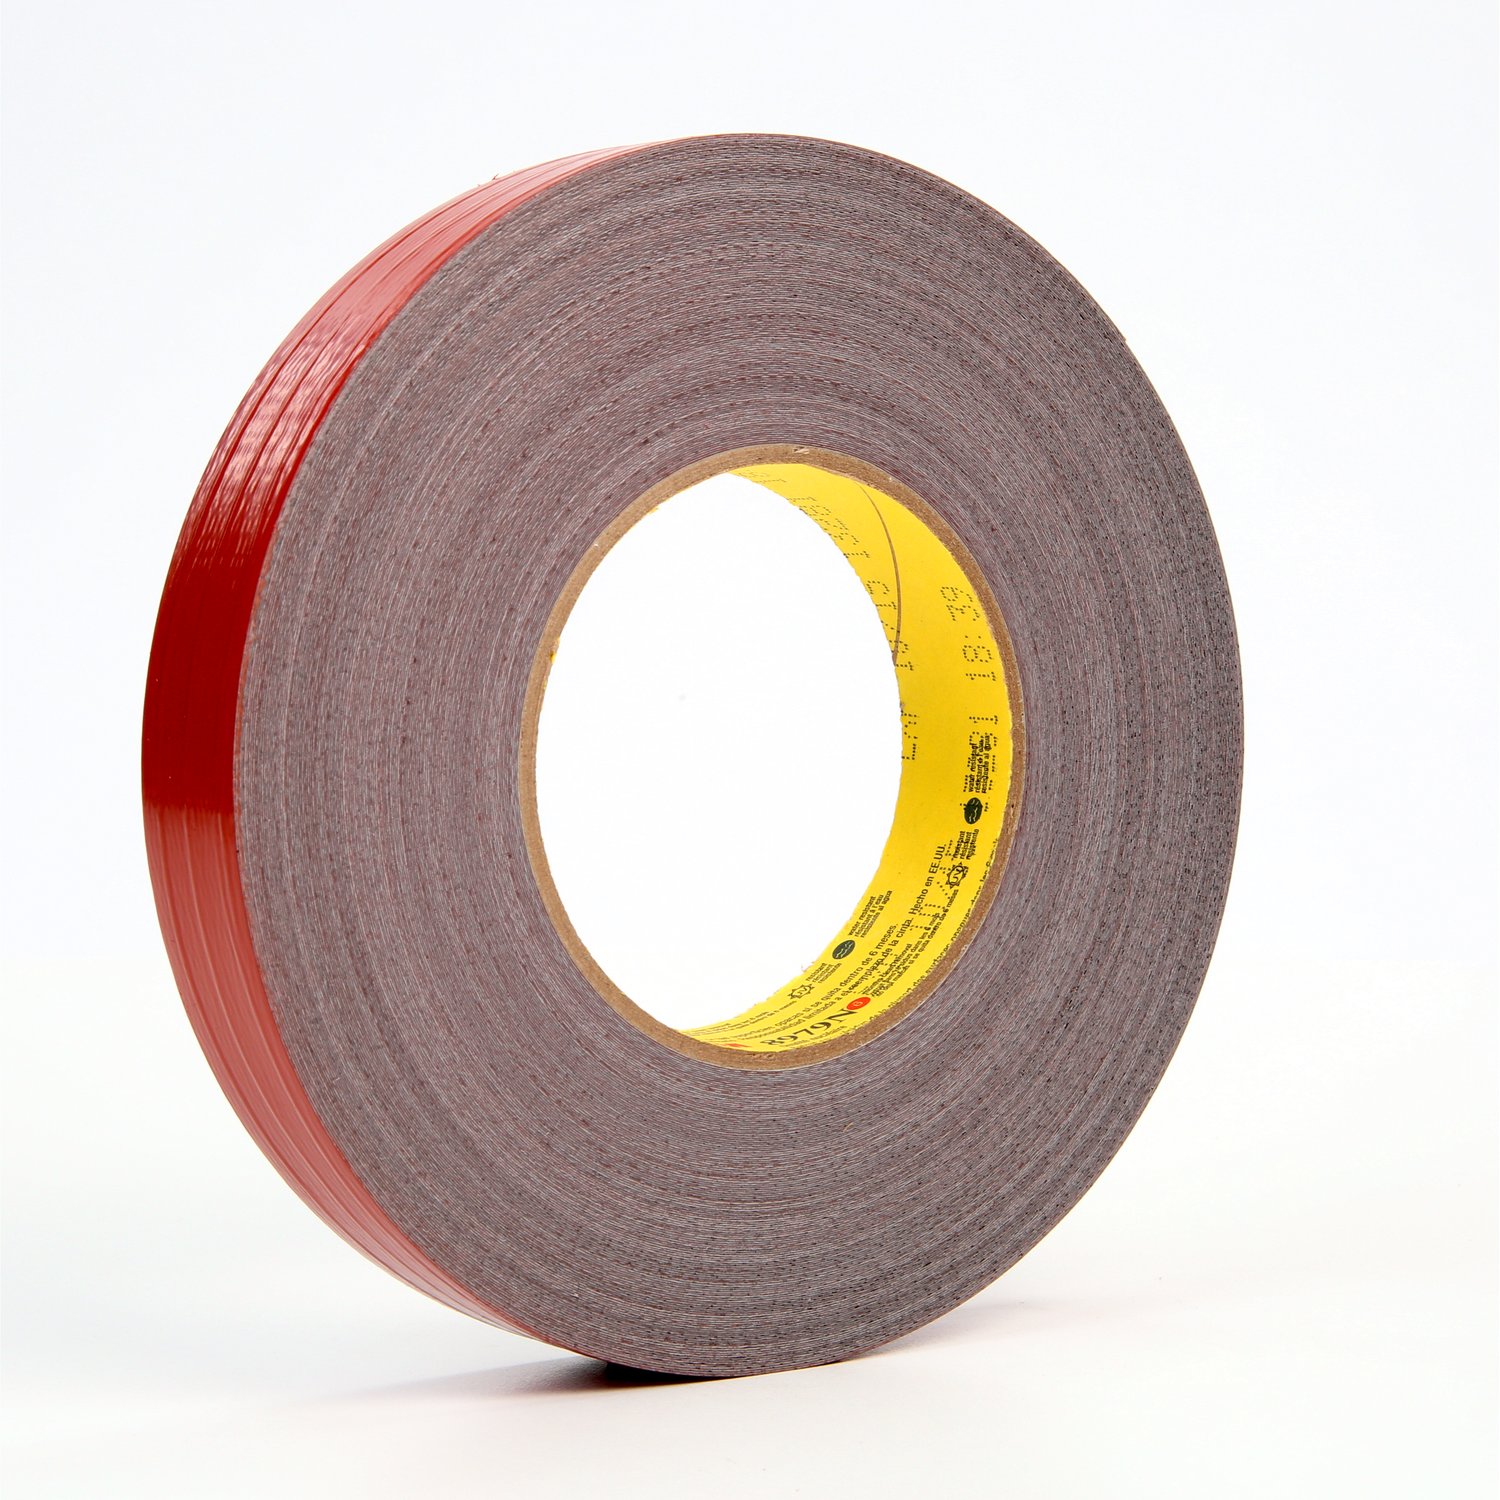 7000124223 - 3M Performance Plus Duct Tape 8979N, (Nuclear), Red, 24 mm x 54.8 m,
12.1 mil, 48/Case